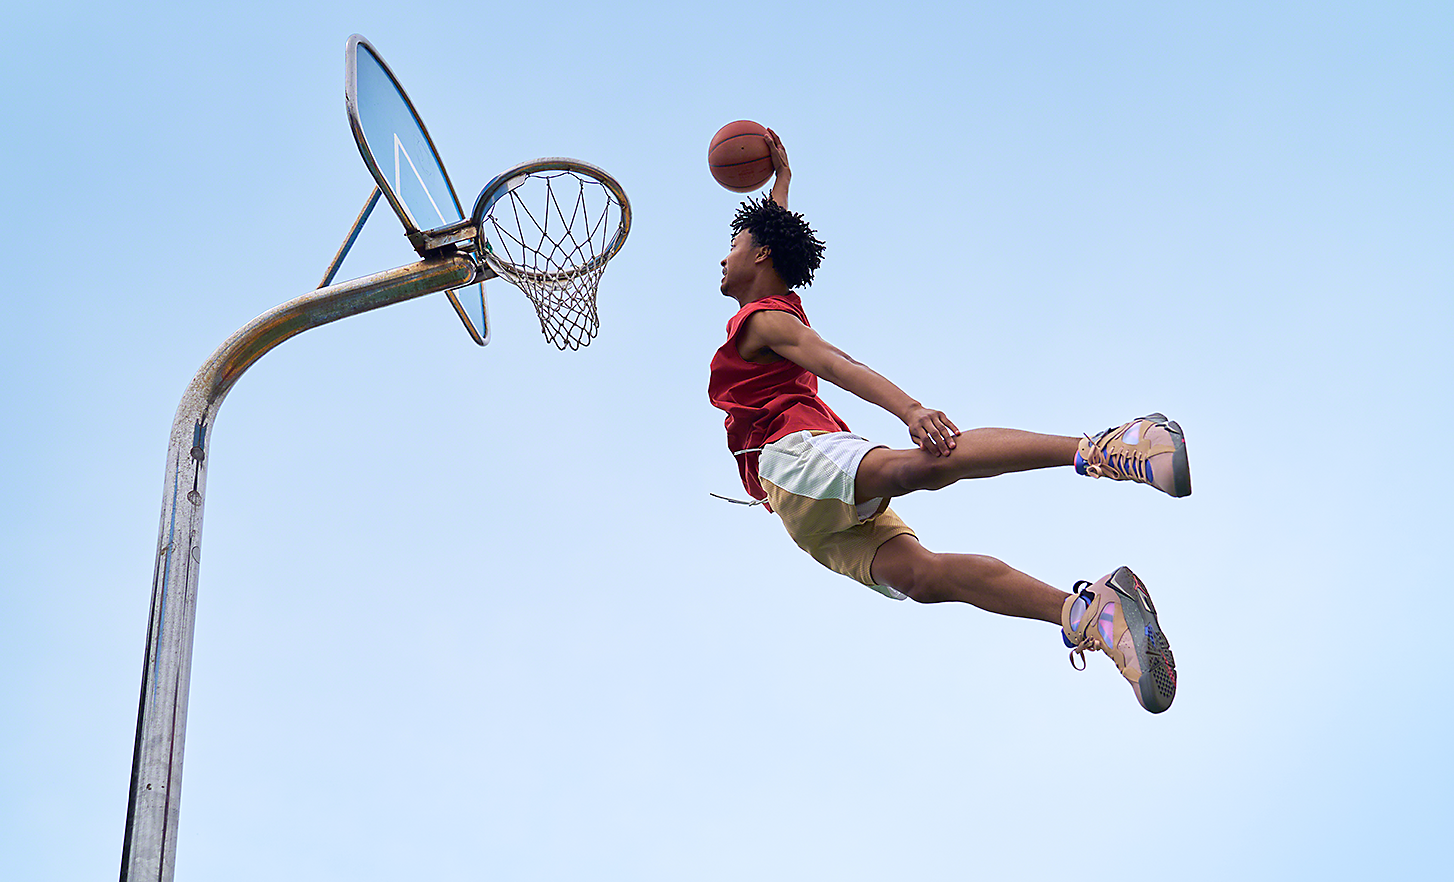 Dramatic shot of basketball player in mid-air about to slam dunk